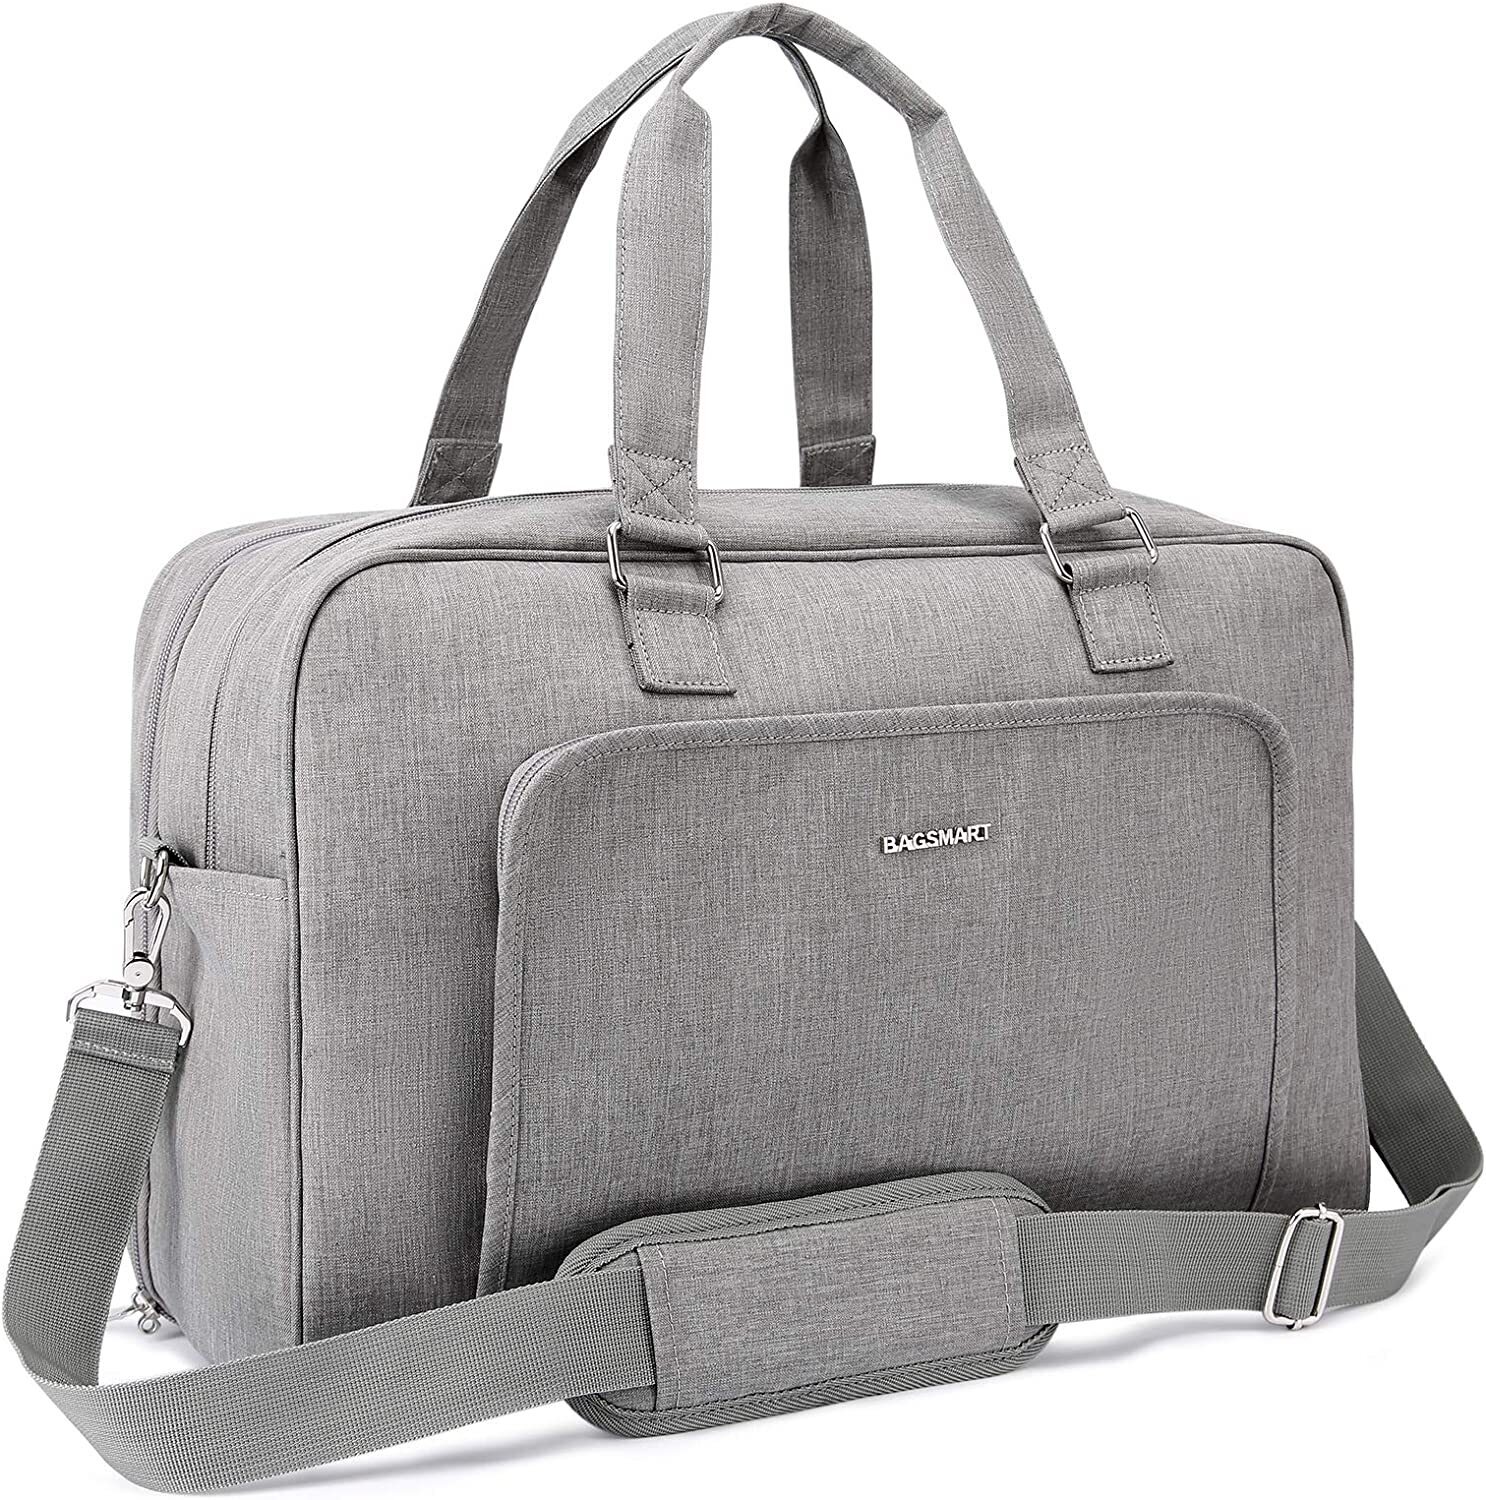 Grey Weekend Bag With Laptop Compartment